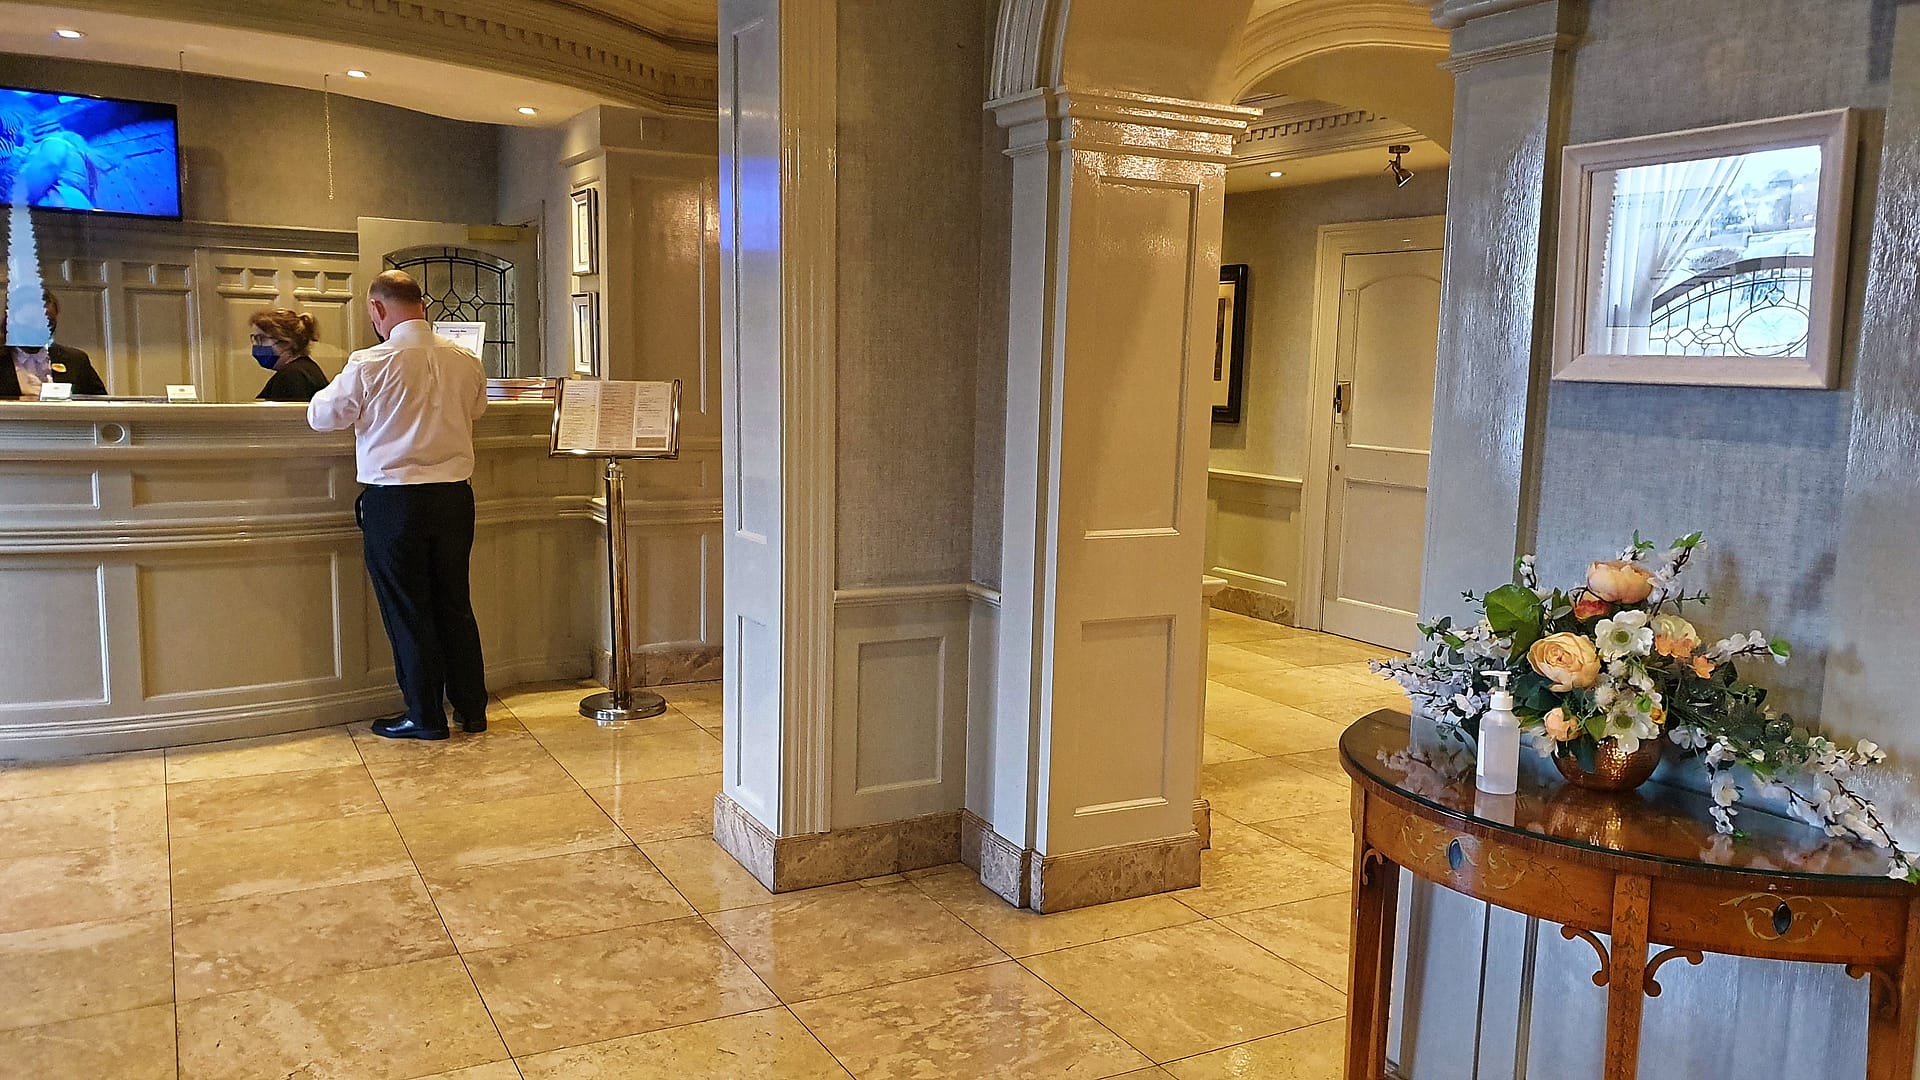 Reception area in the Granville Hotel, Waterford